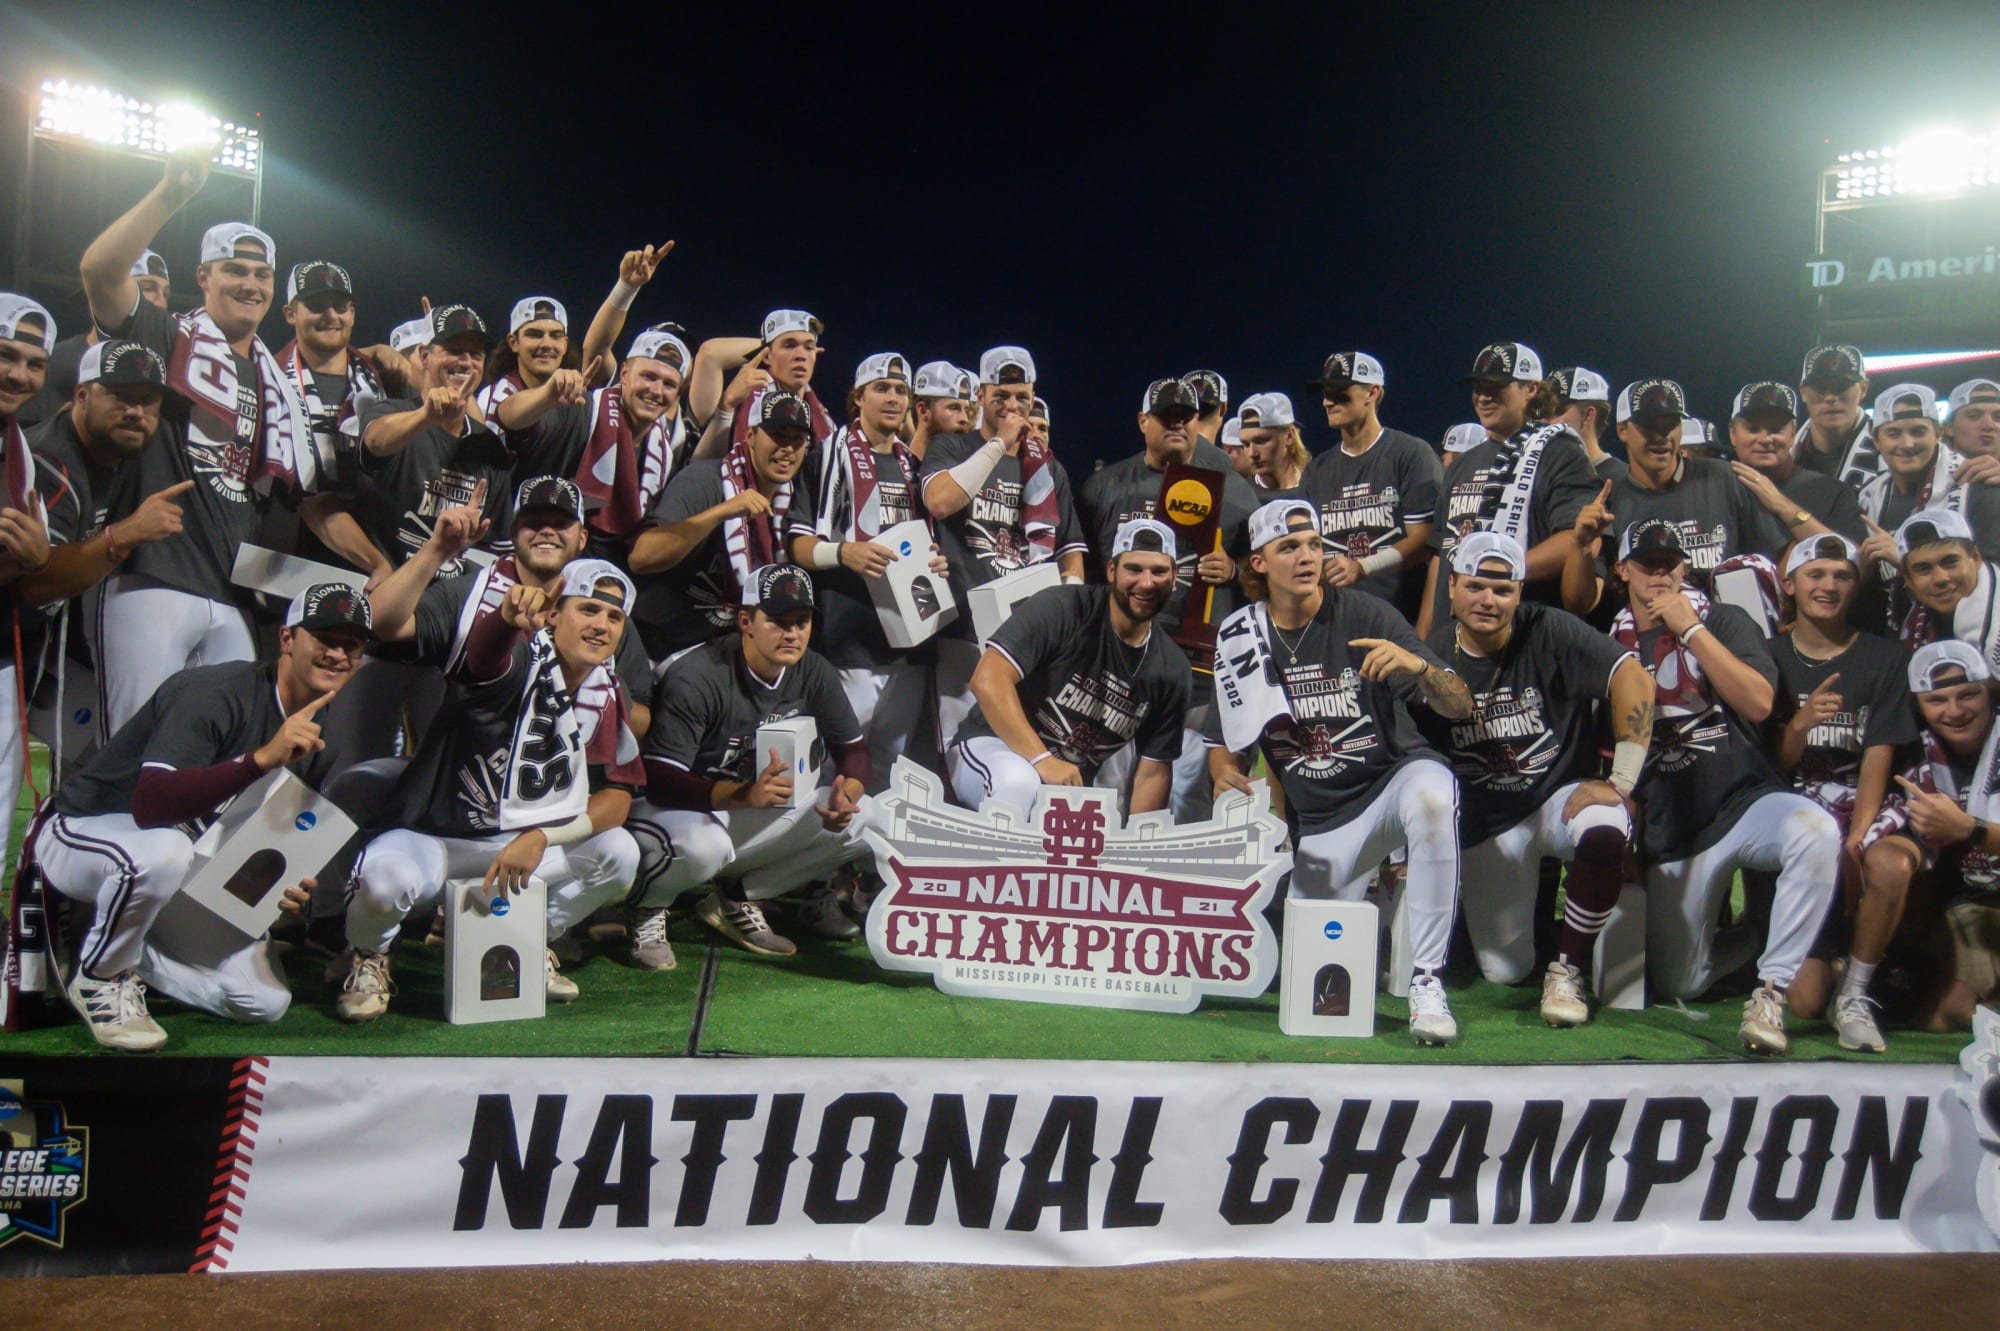 Mississippi State BaseballThe Bulldogs are finally National Champions